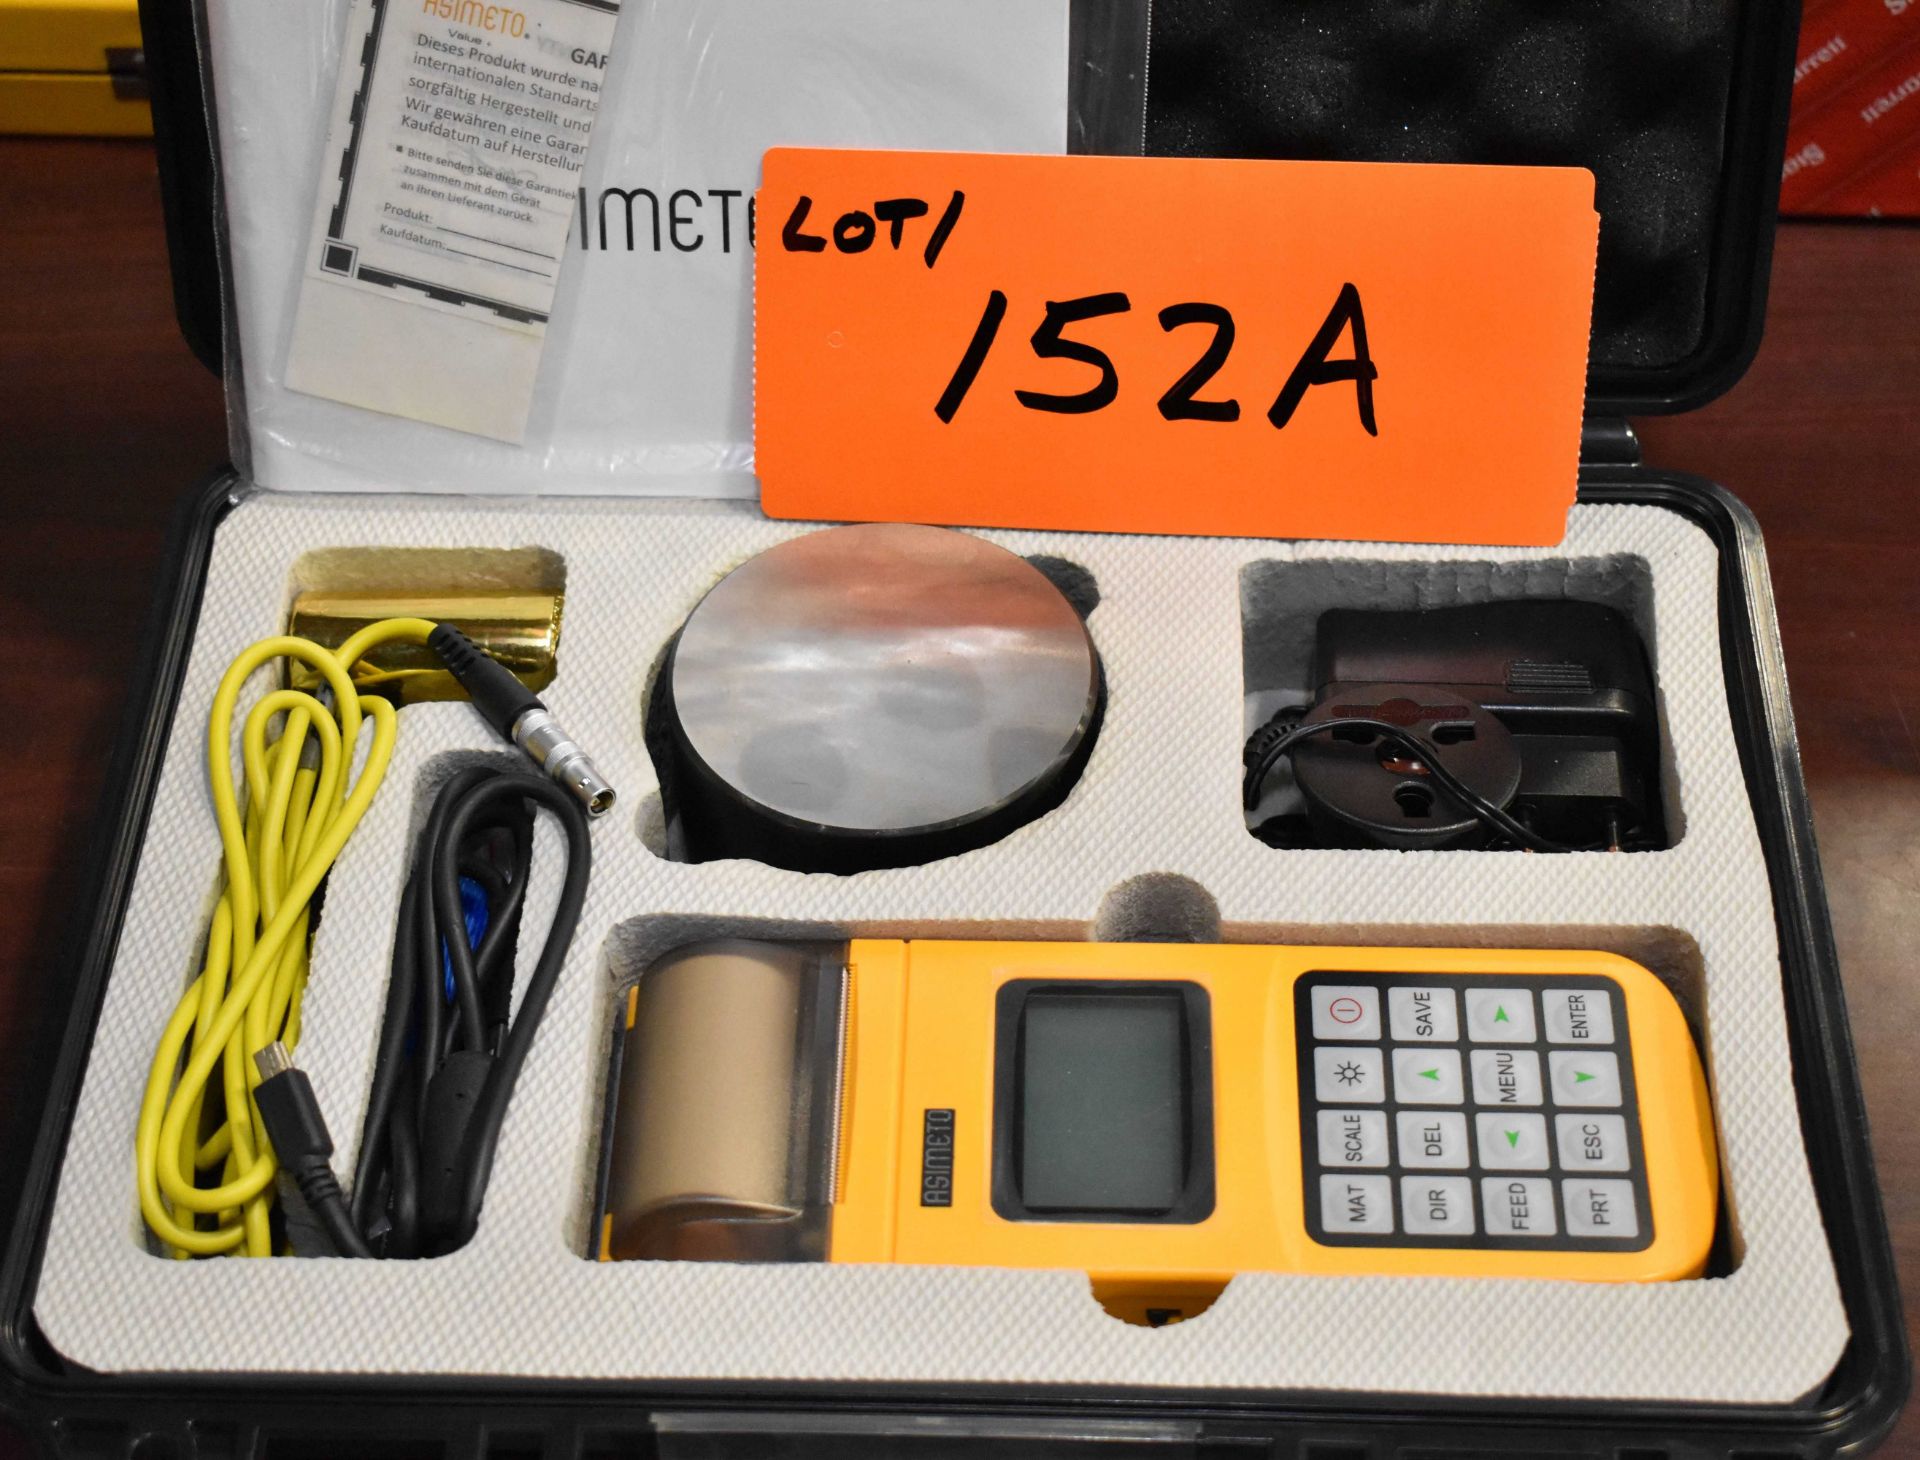 ASIMETO PORTABLE DIGITAL HARDNESS TESTER [RIGGING FEES FOR LOT #152 A - $10 USD PLUS APPLICABLE